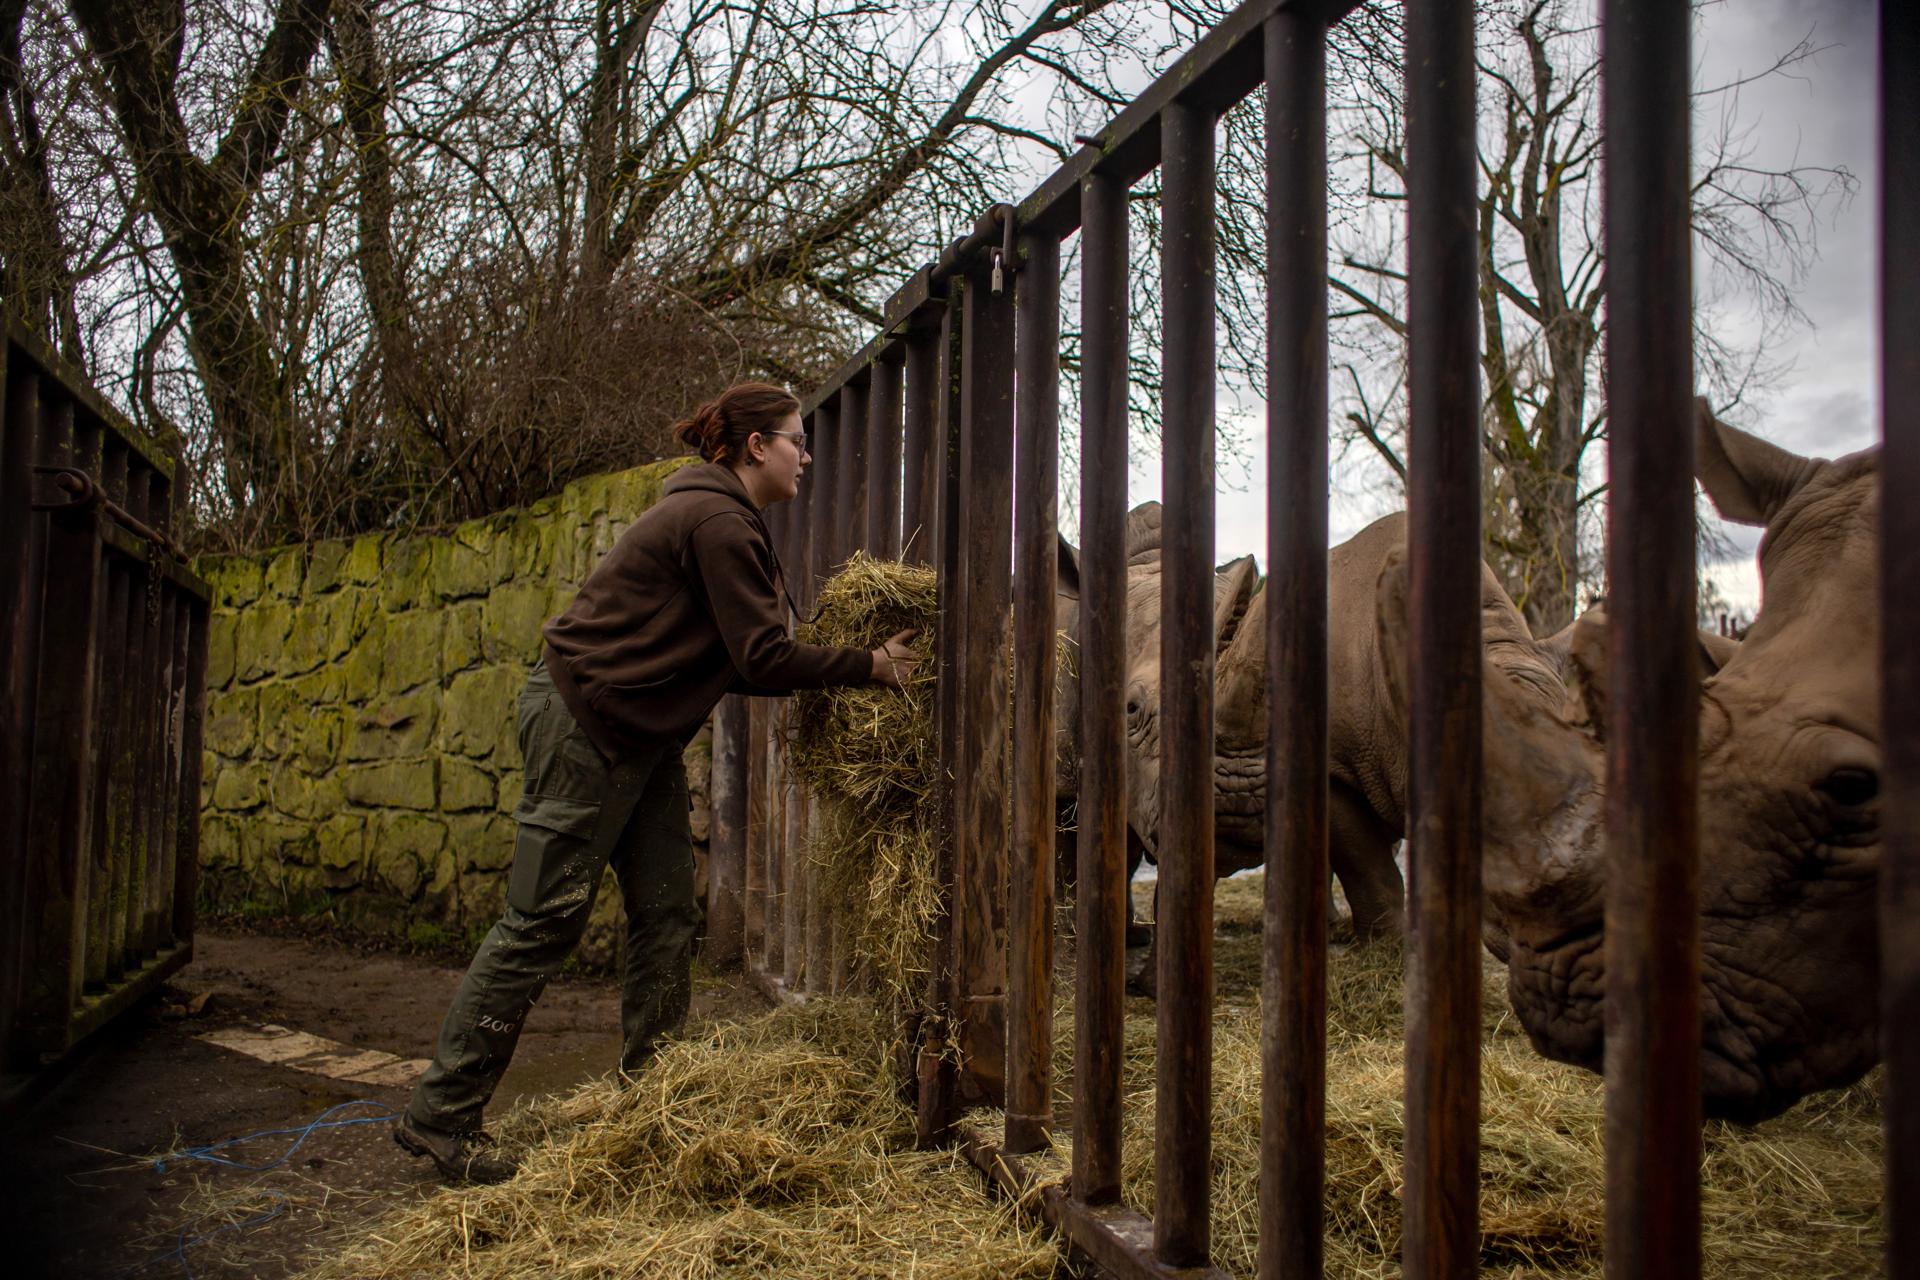 A keeper feeds white rhinos inside enclosure at the Safari Park in Dvur Kralove nad Labem, Czech Republic, 14 March 2023 (issued 17 March 2023). EFE/EPA/MARTIN DIVISEK